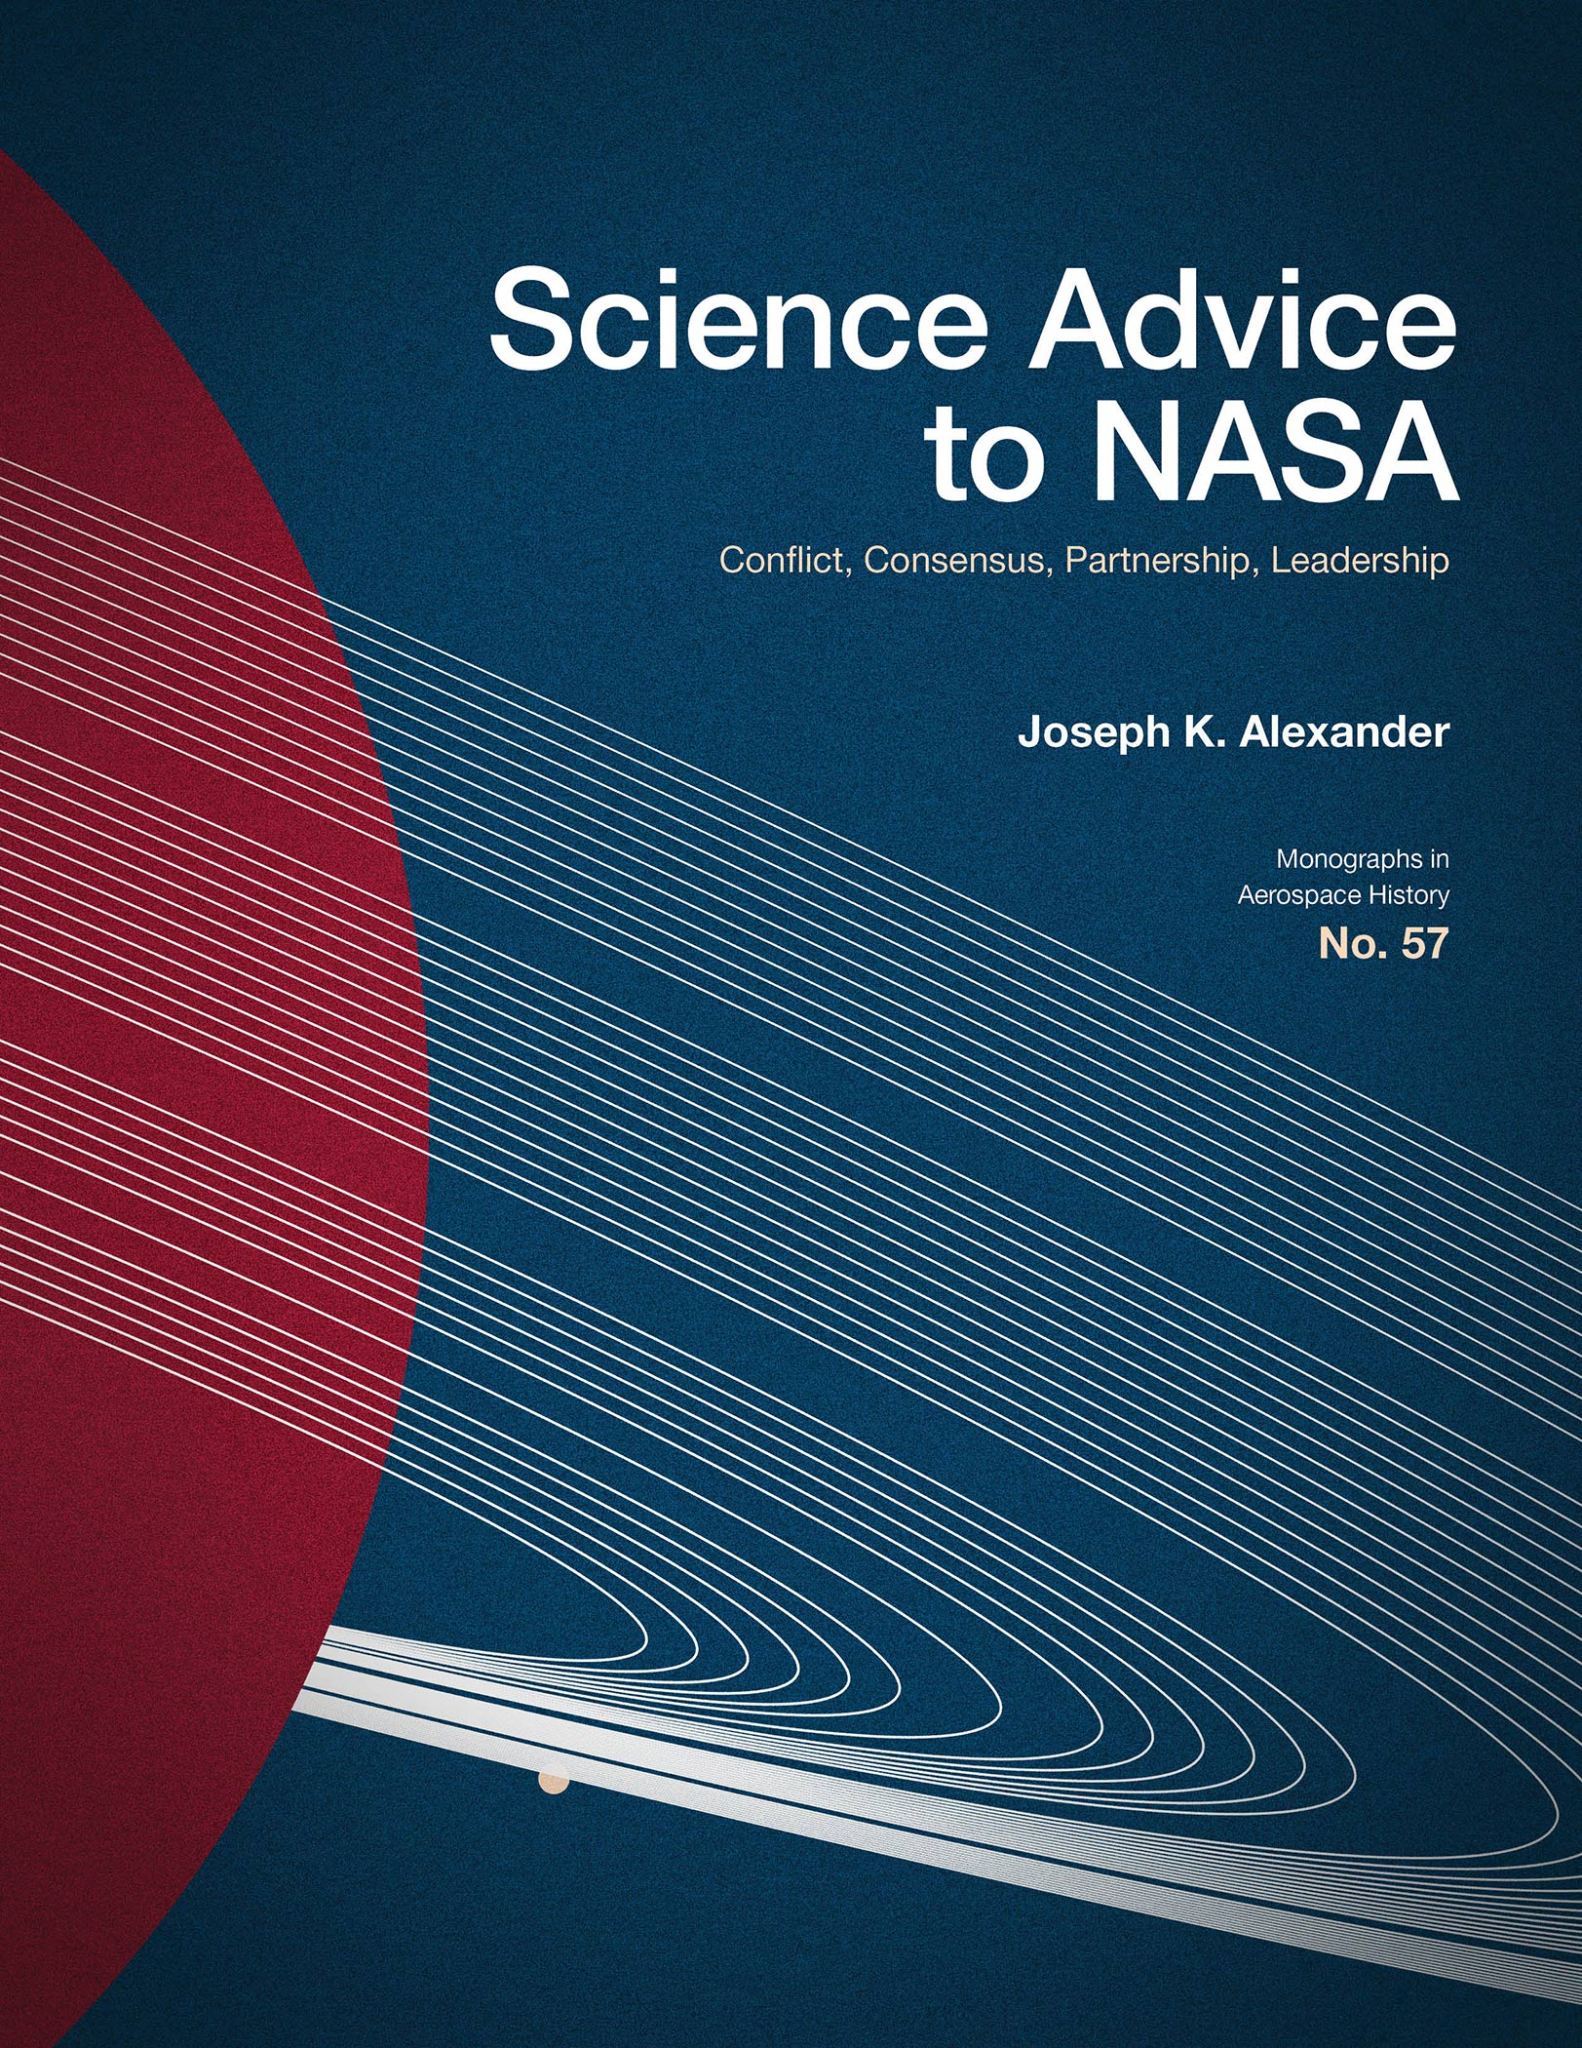 Science Advice to NASA book cover